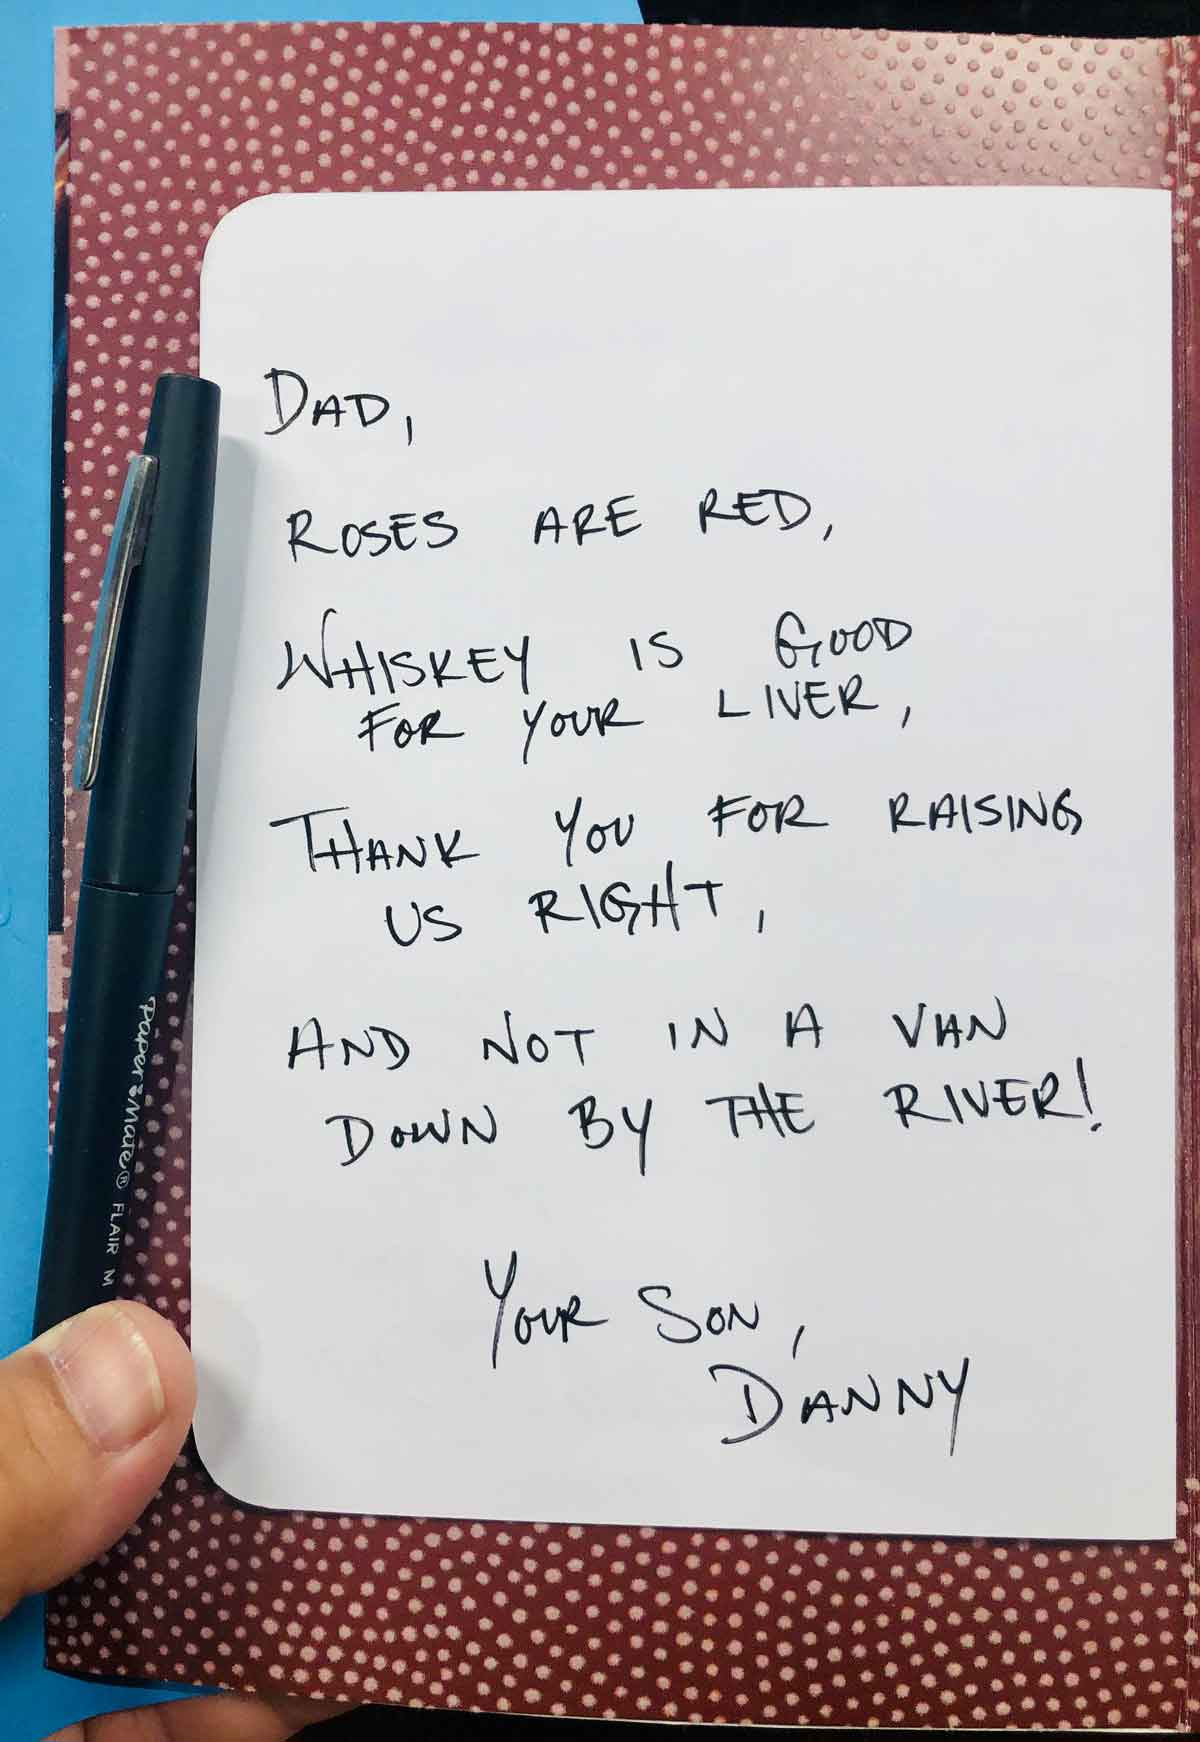 On my way to visit Dad, I got him a card. I’m not a poet..